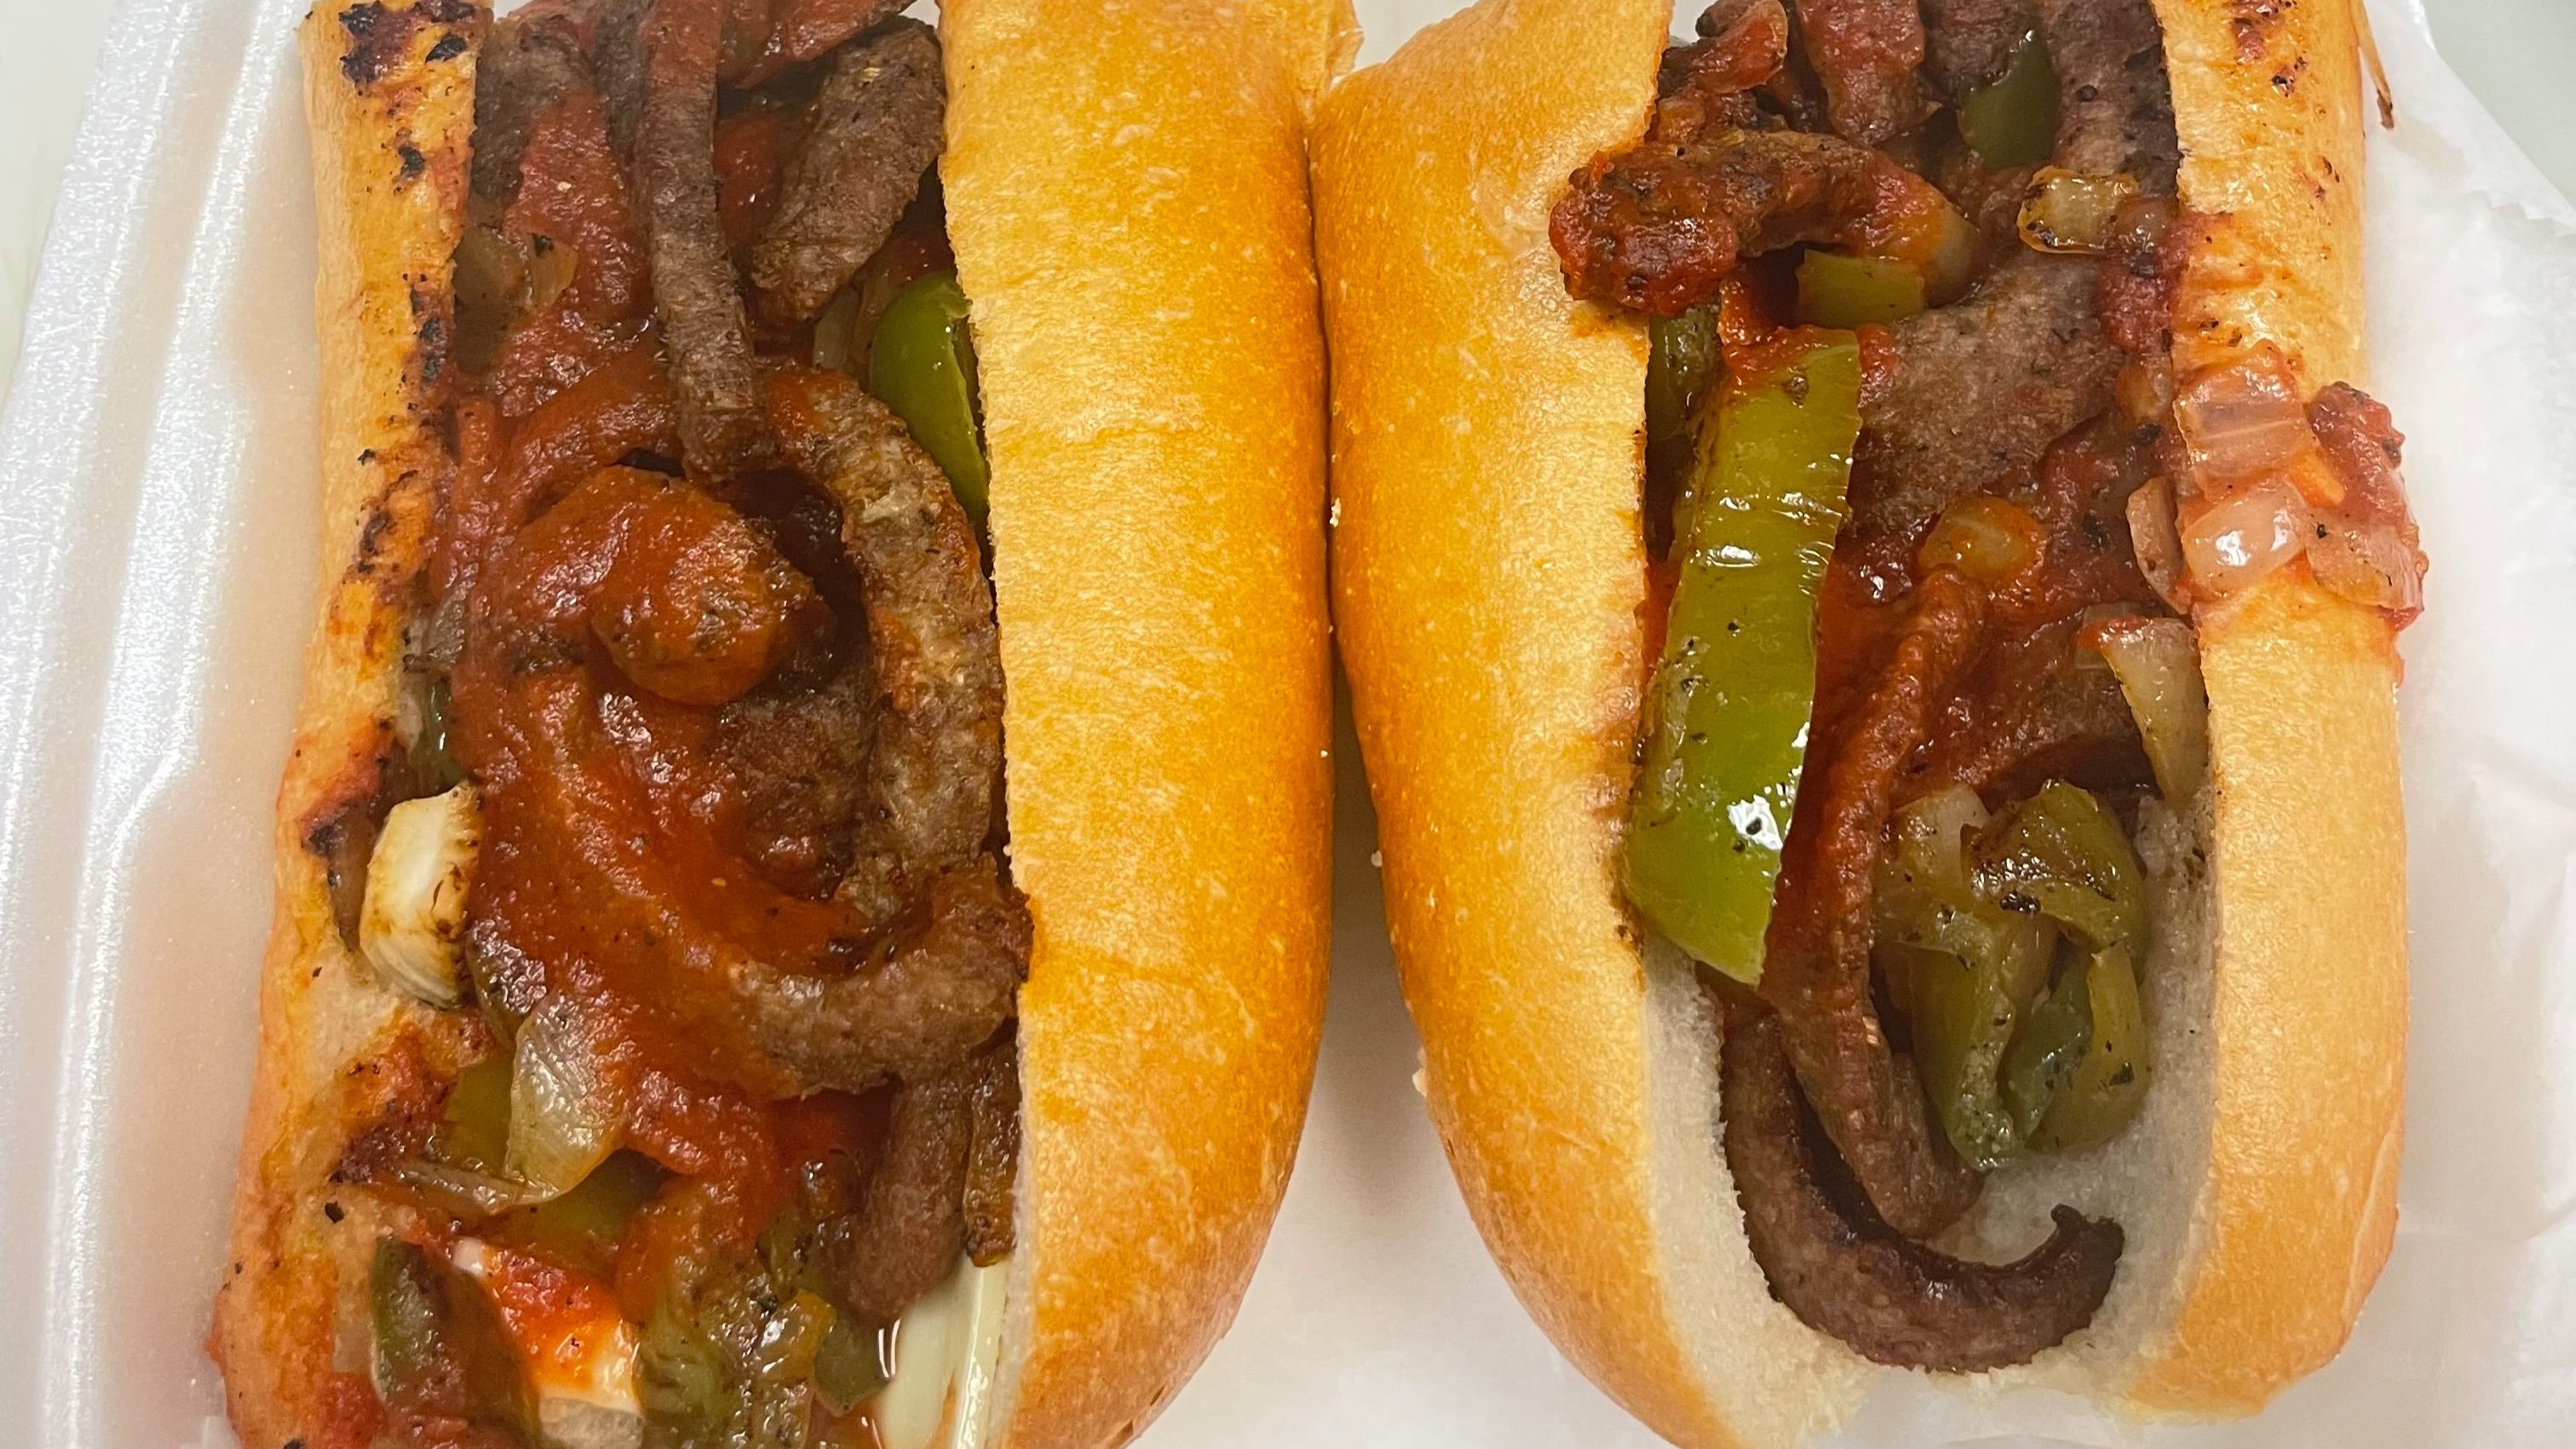 Sausage, Green Peppers & Onions sandwiches